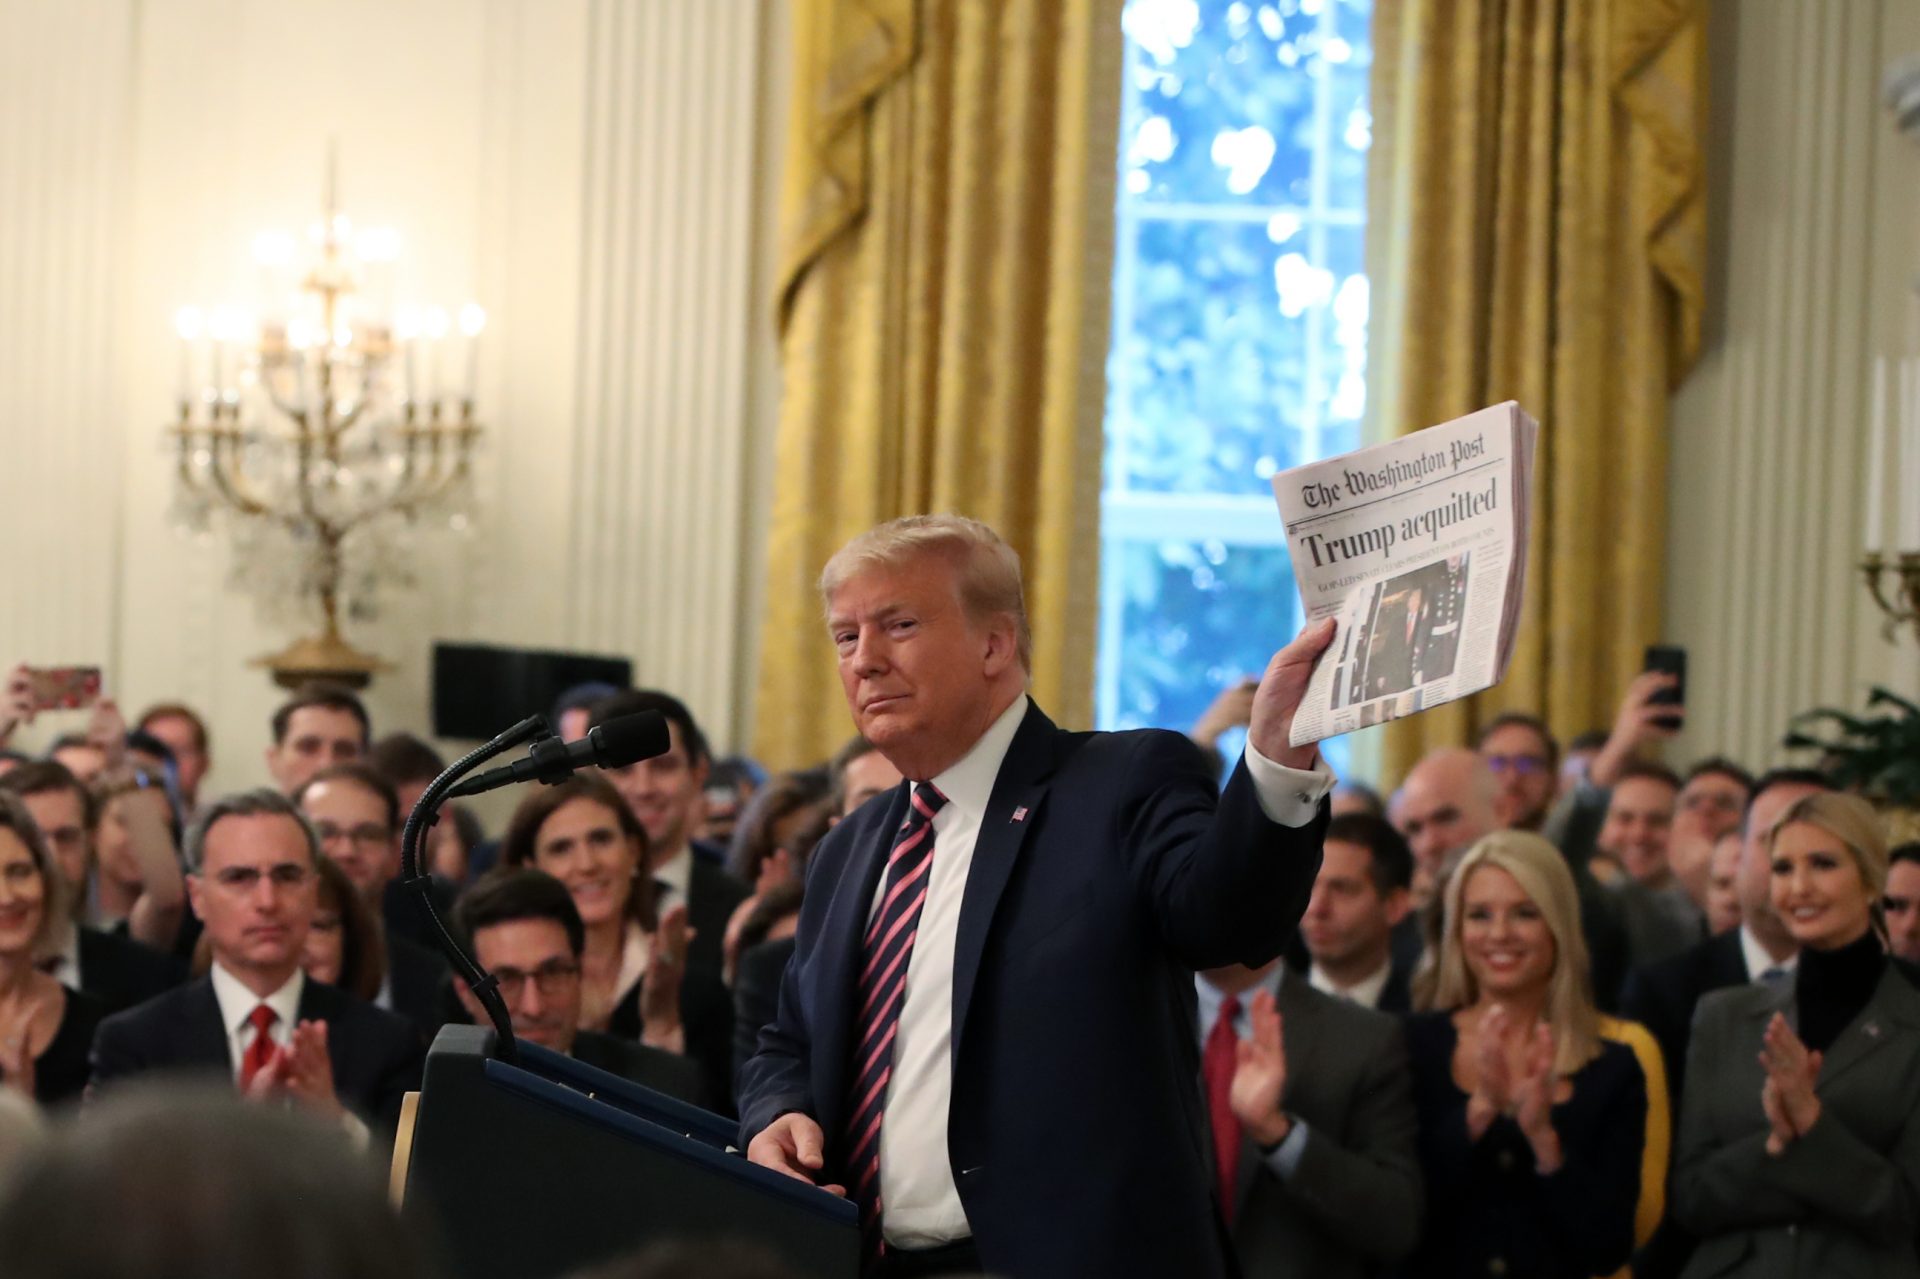 President Trump, surrounded by members of his administration and supporters, holds up a newspaper during remarks at the White House on Thursday.